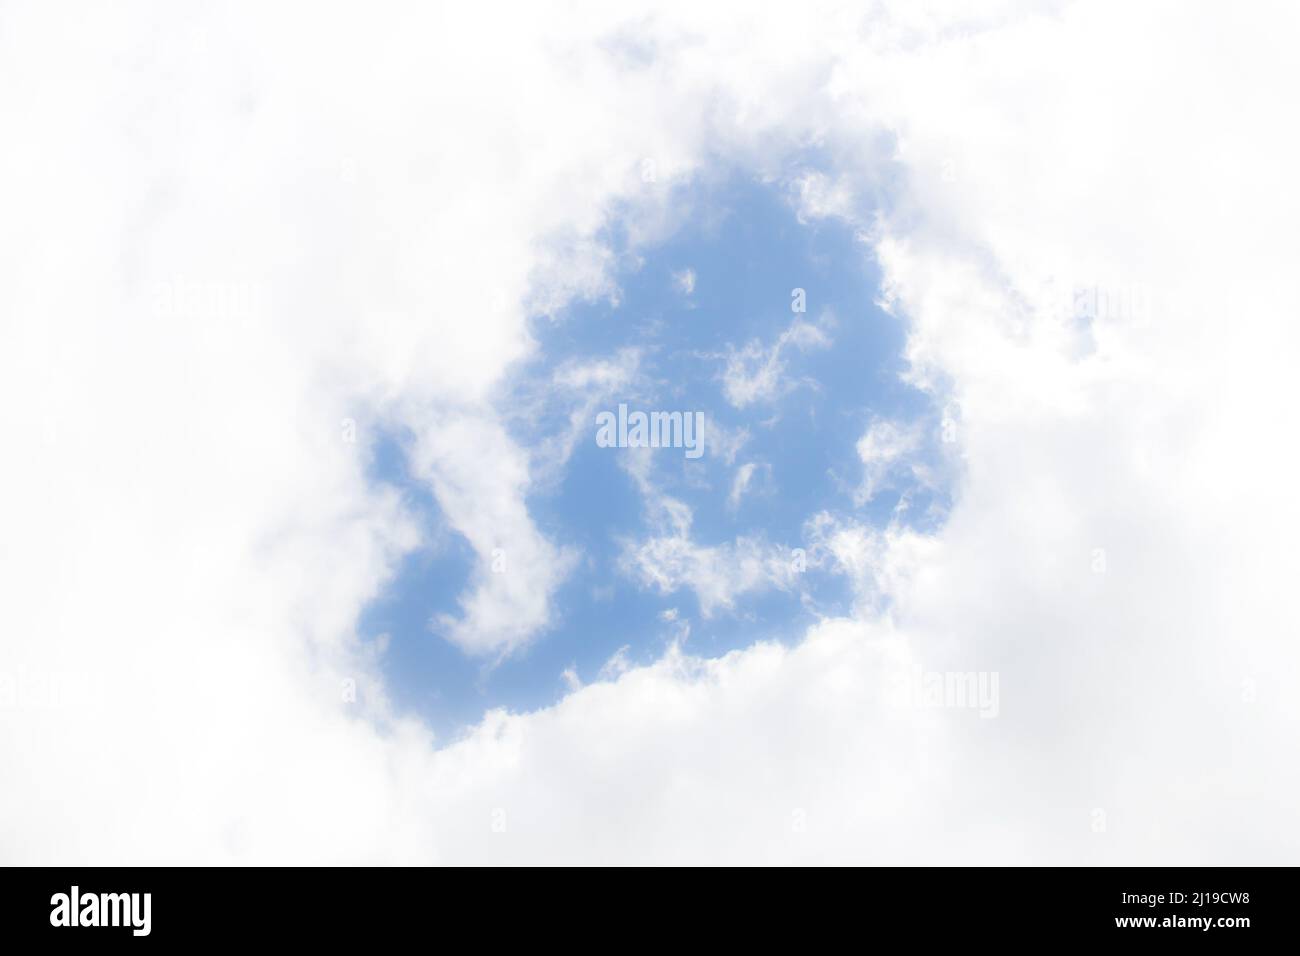 Blue sky through the eye of glowing white fluffy clouds. Stock Photo